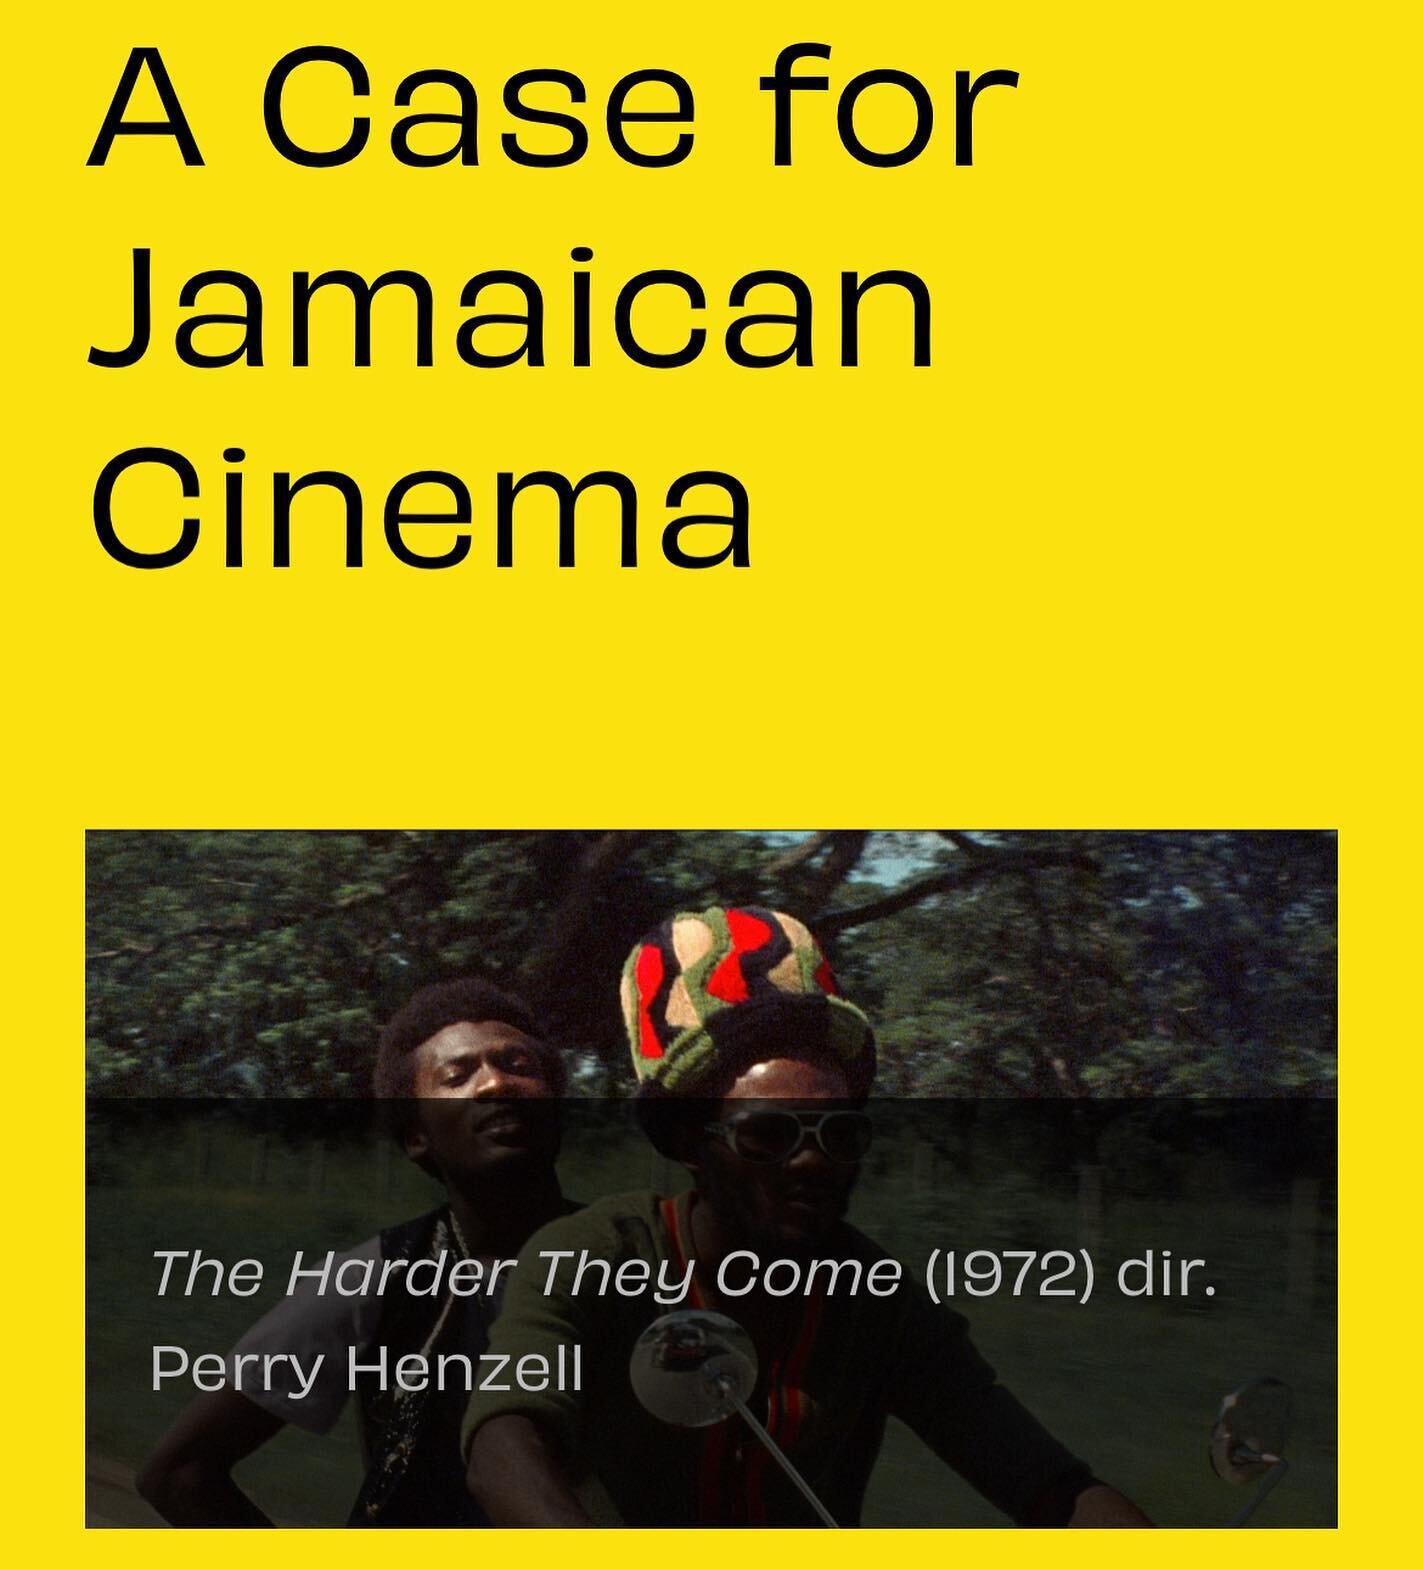 the small island nation of Jamaica has a lot to show for itself when it comes to film. but what else could be accomplished? founder @a_briana1998 discusses this and more.

🔗 in our bio.